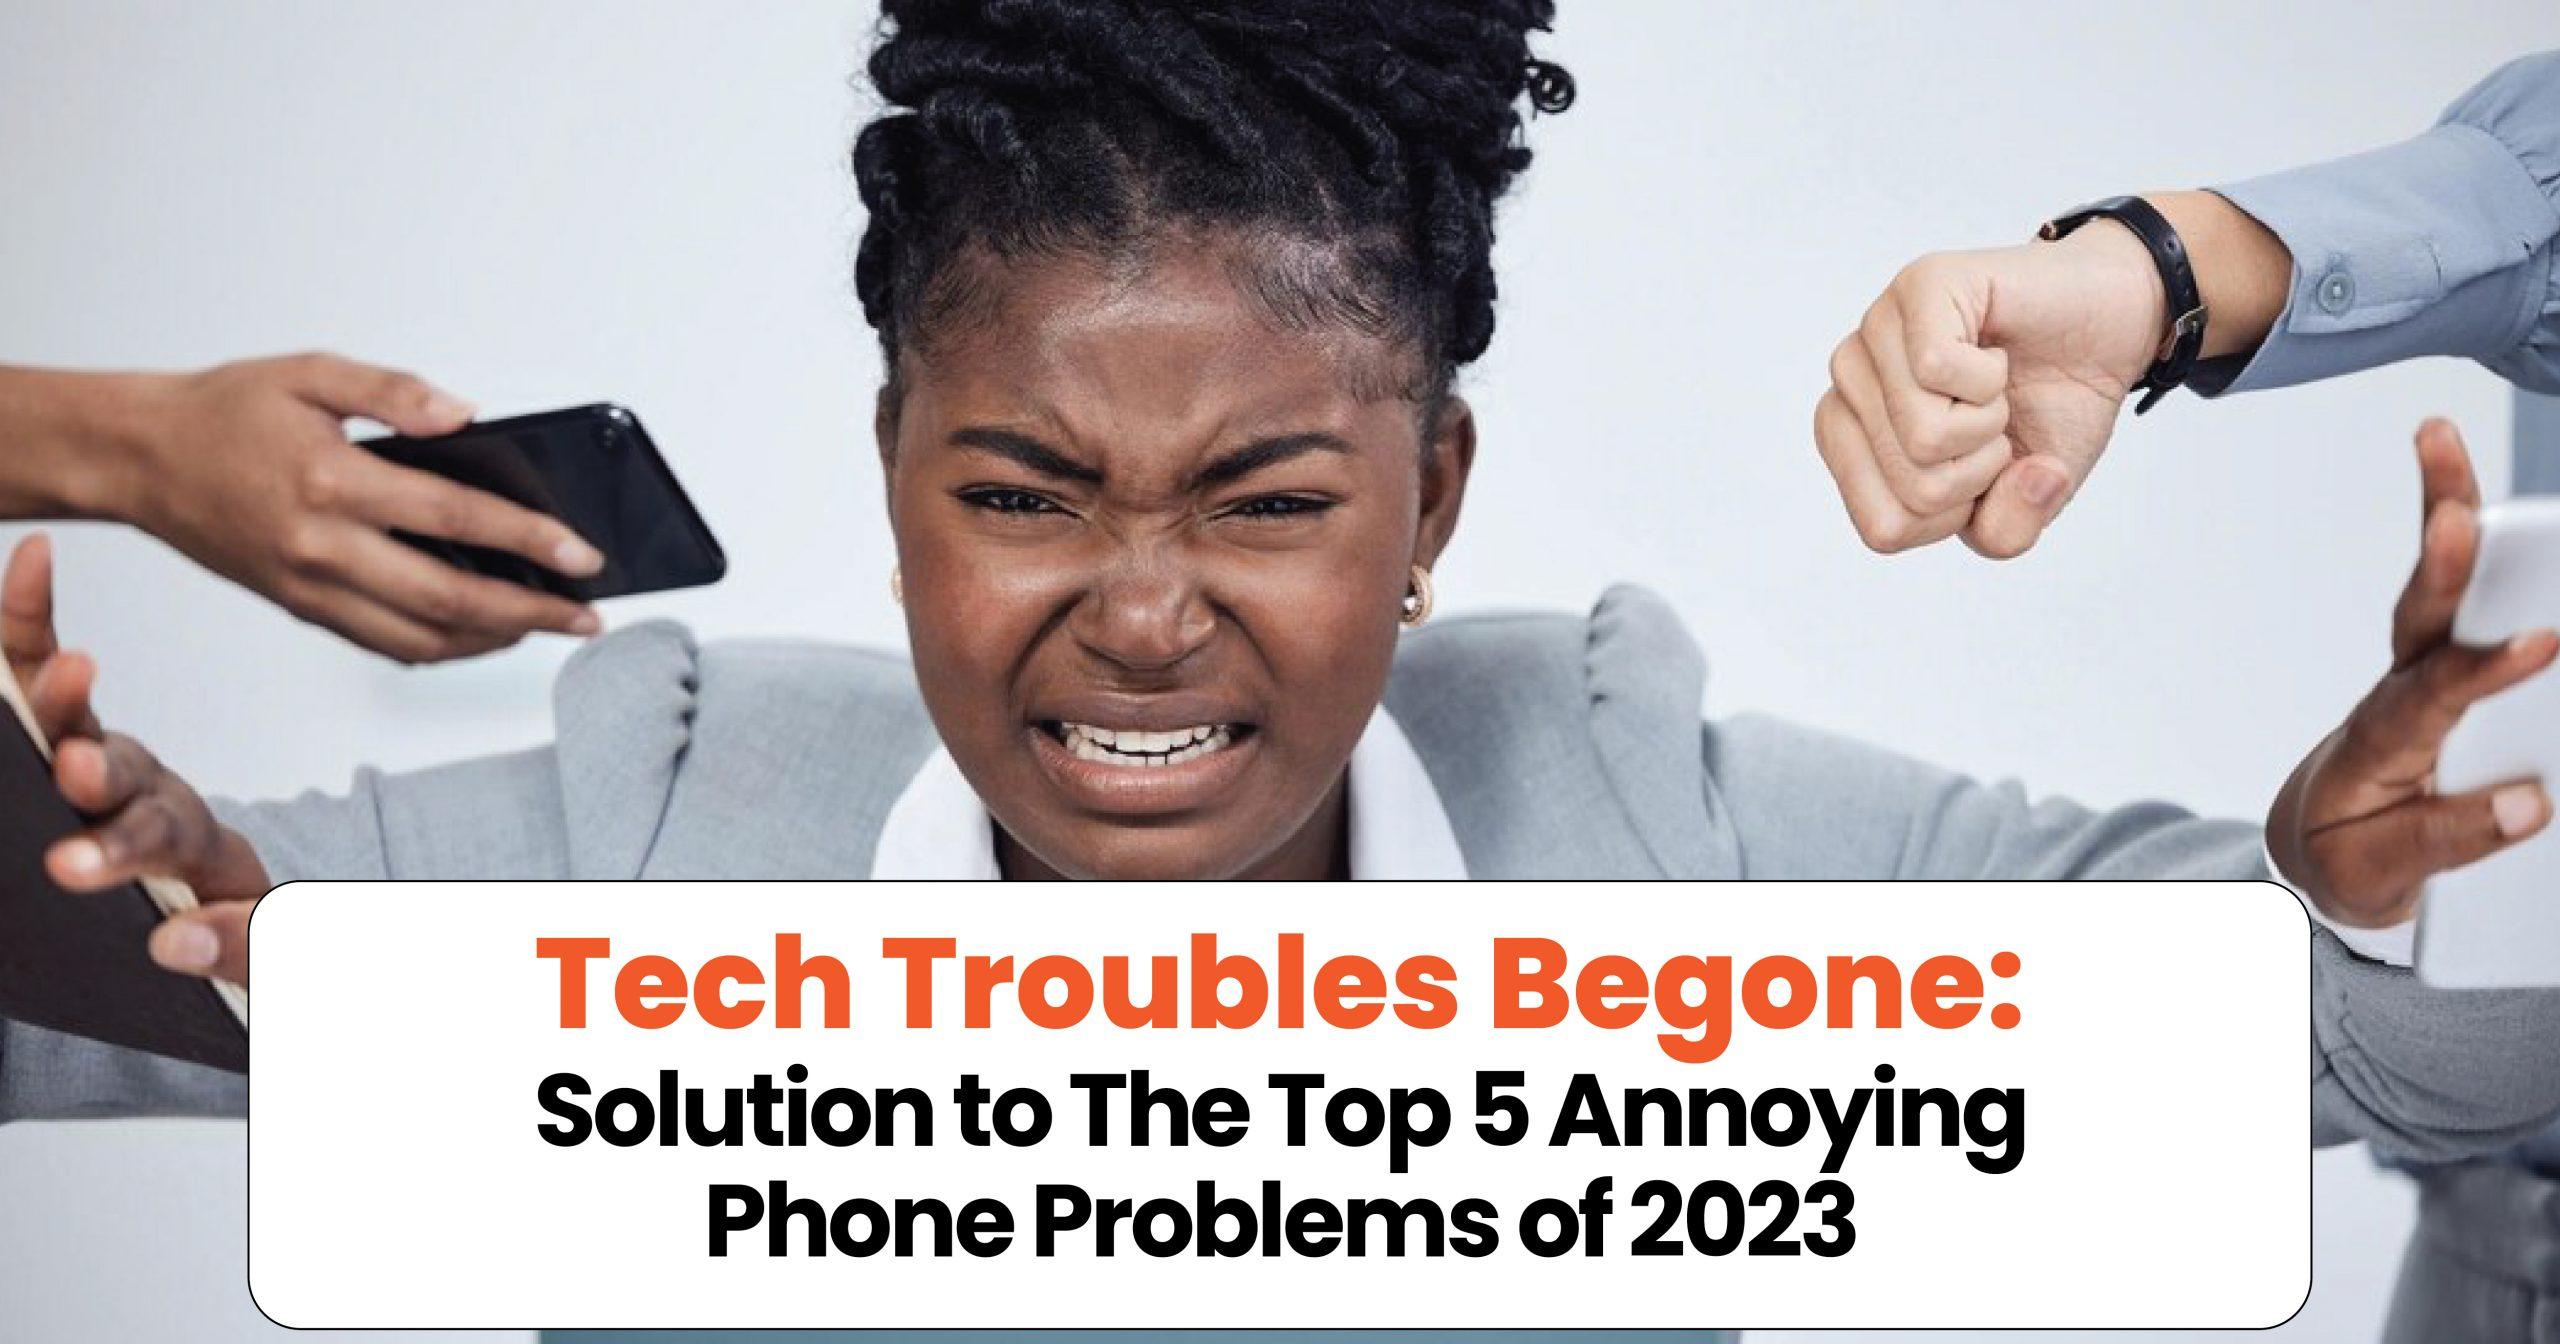 5 Annoying Phone Problems of 2023